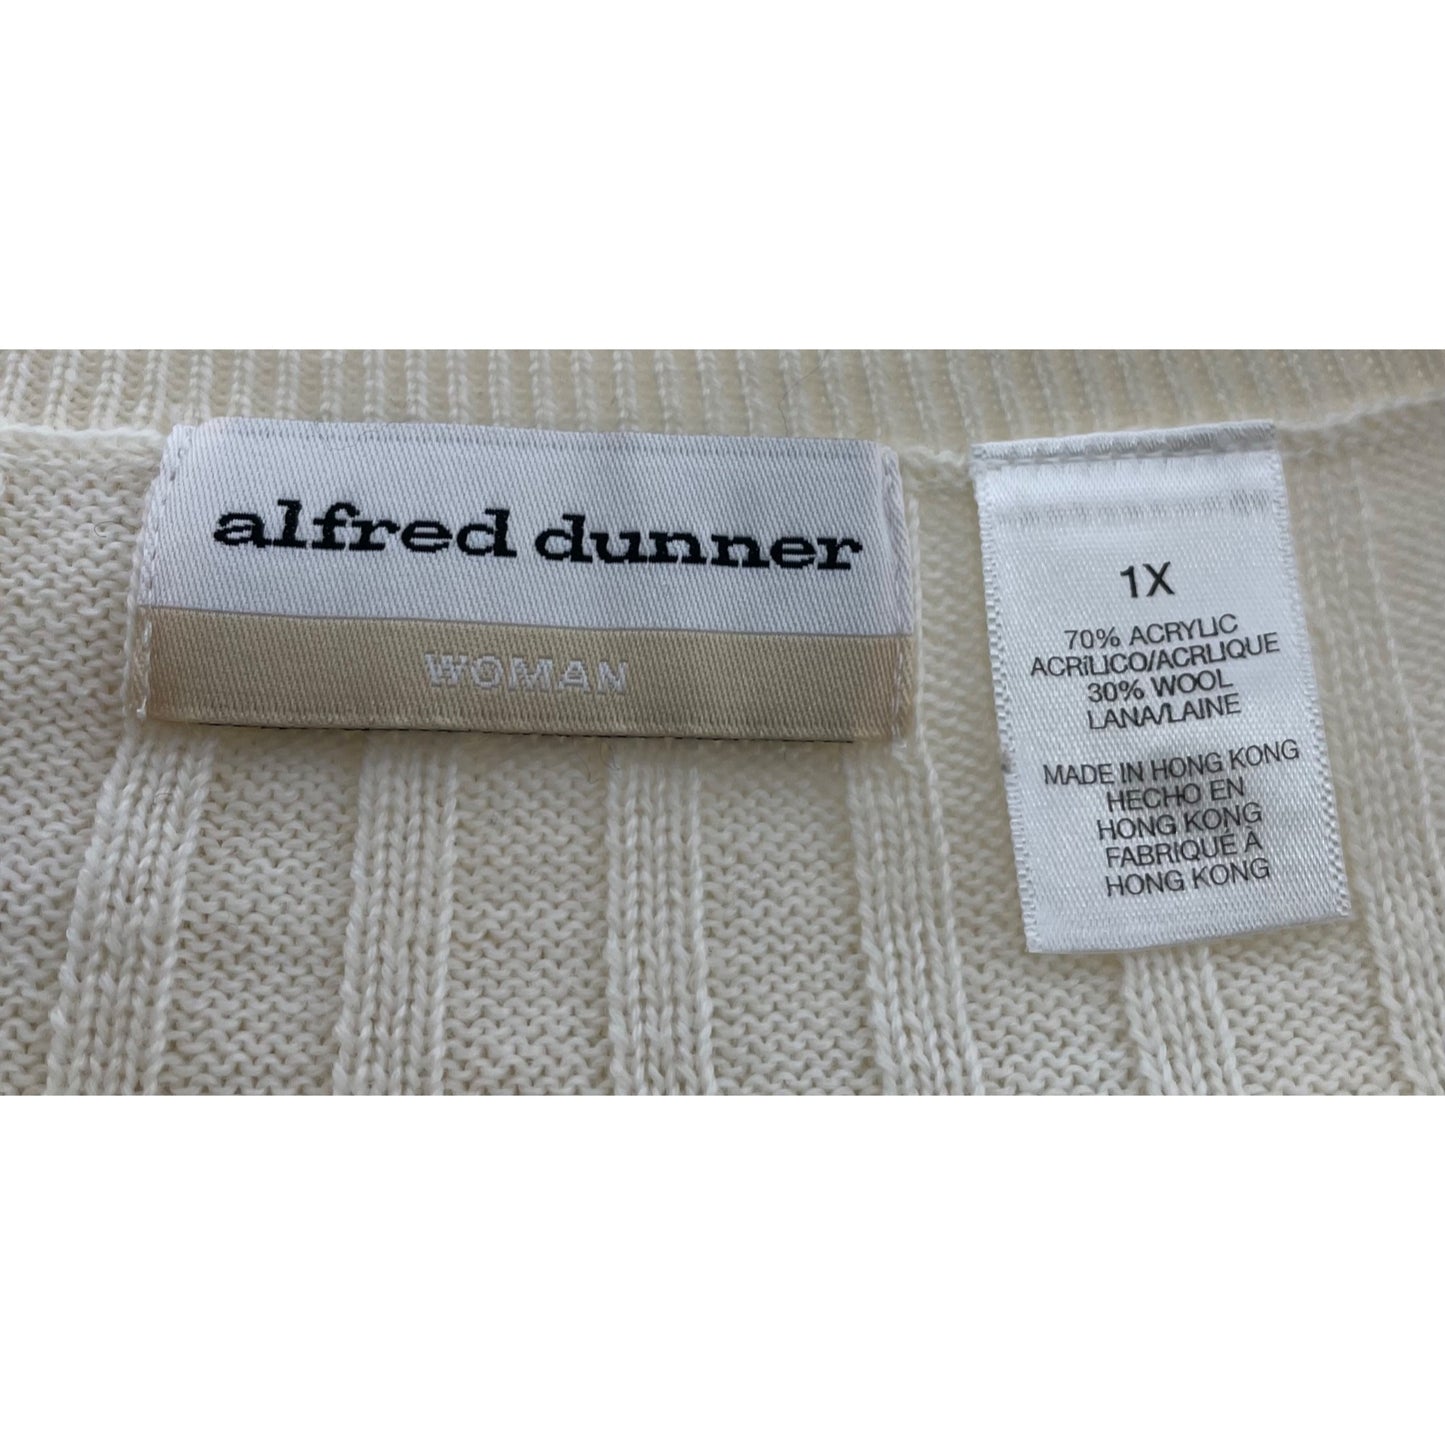 Alfred Dunner Women's Size 1X Cream Ribbed Beaded Short-Sleeved Sweater